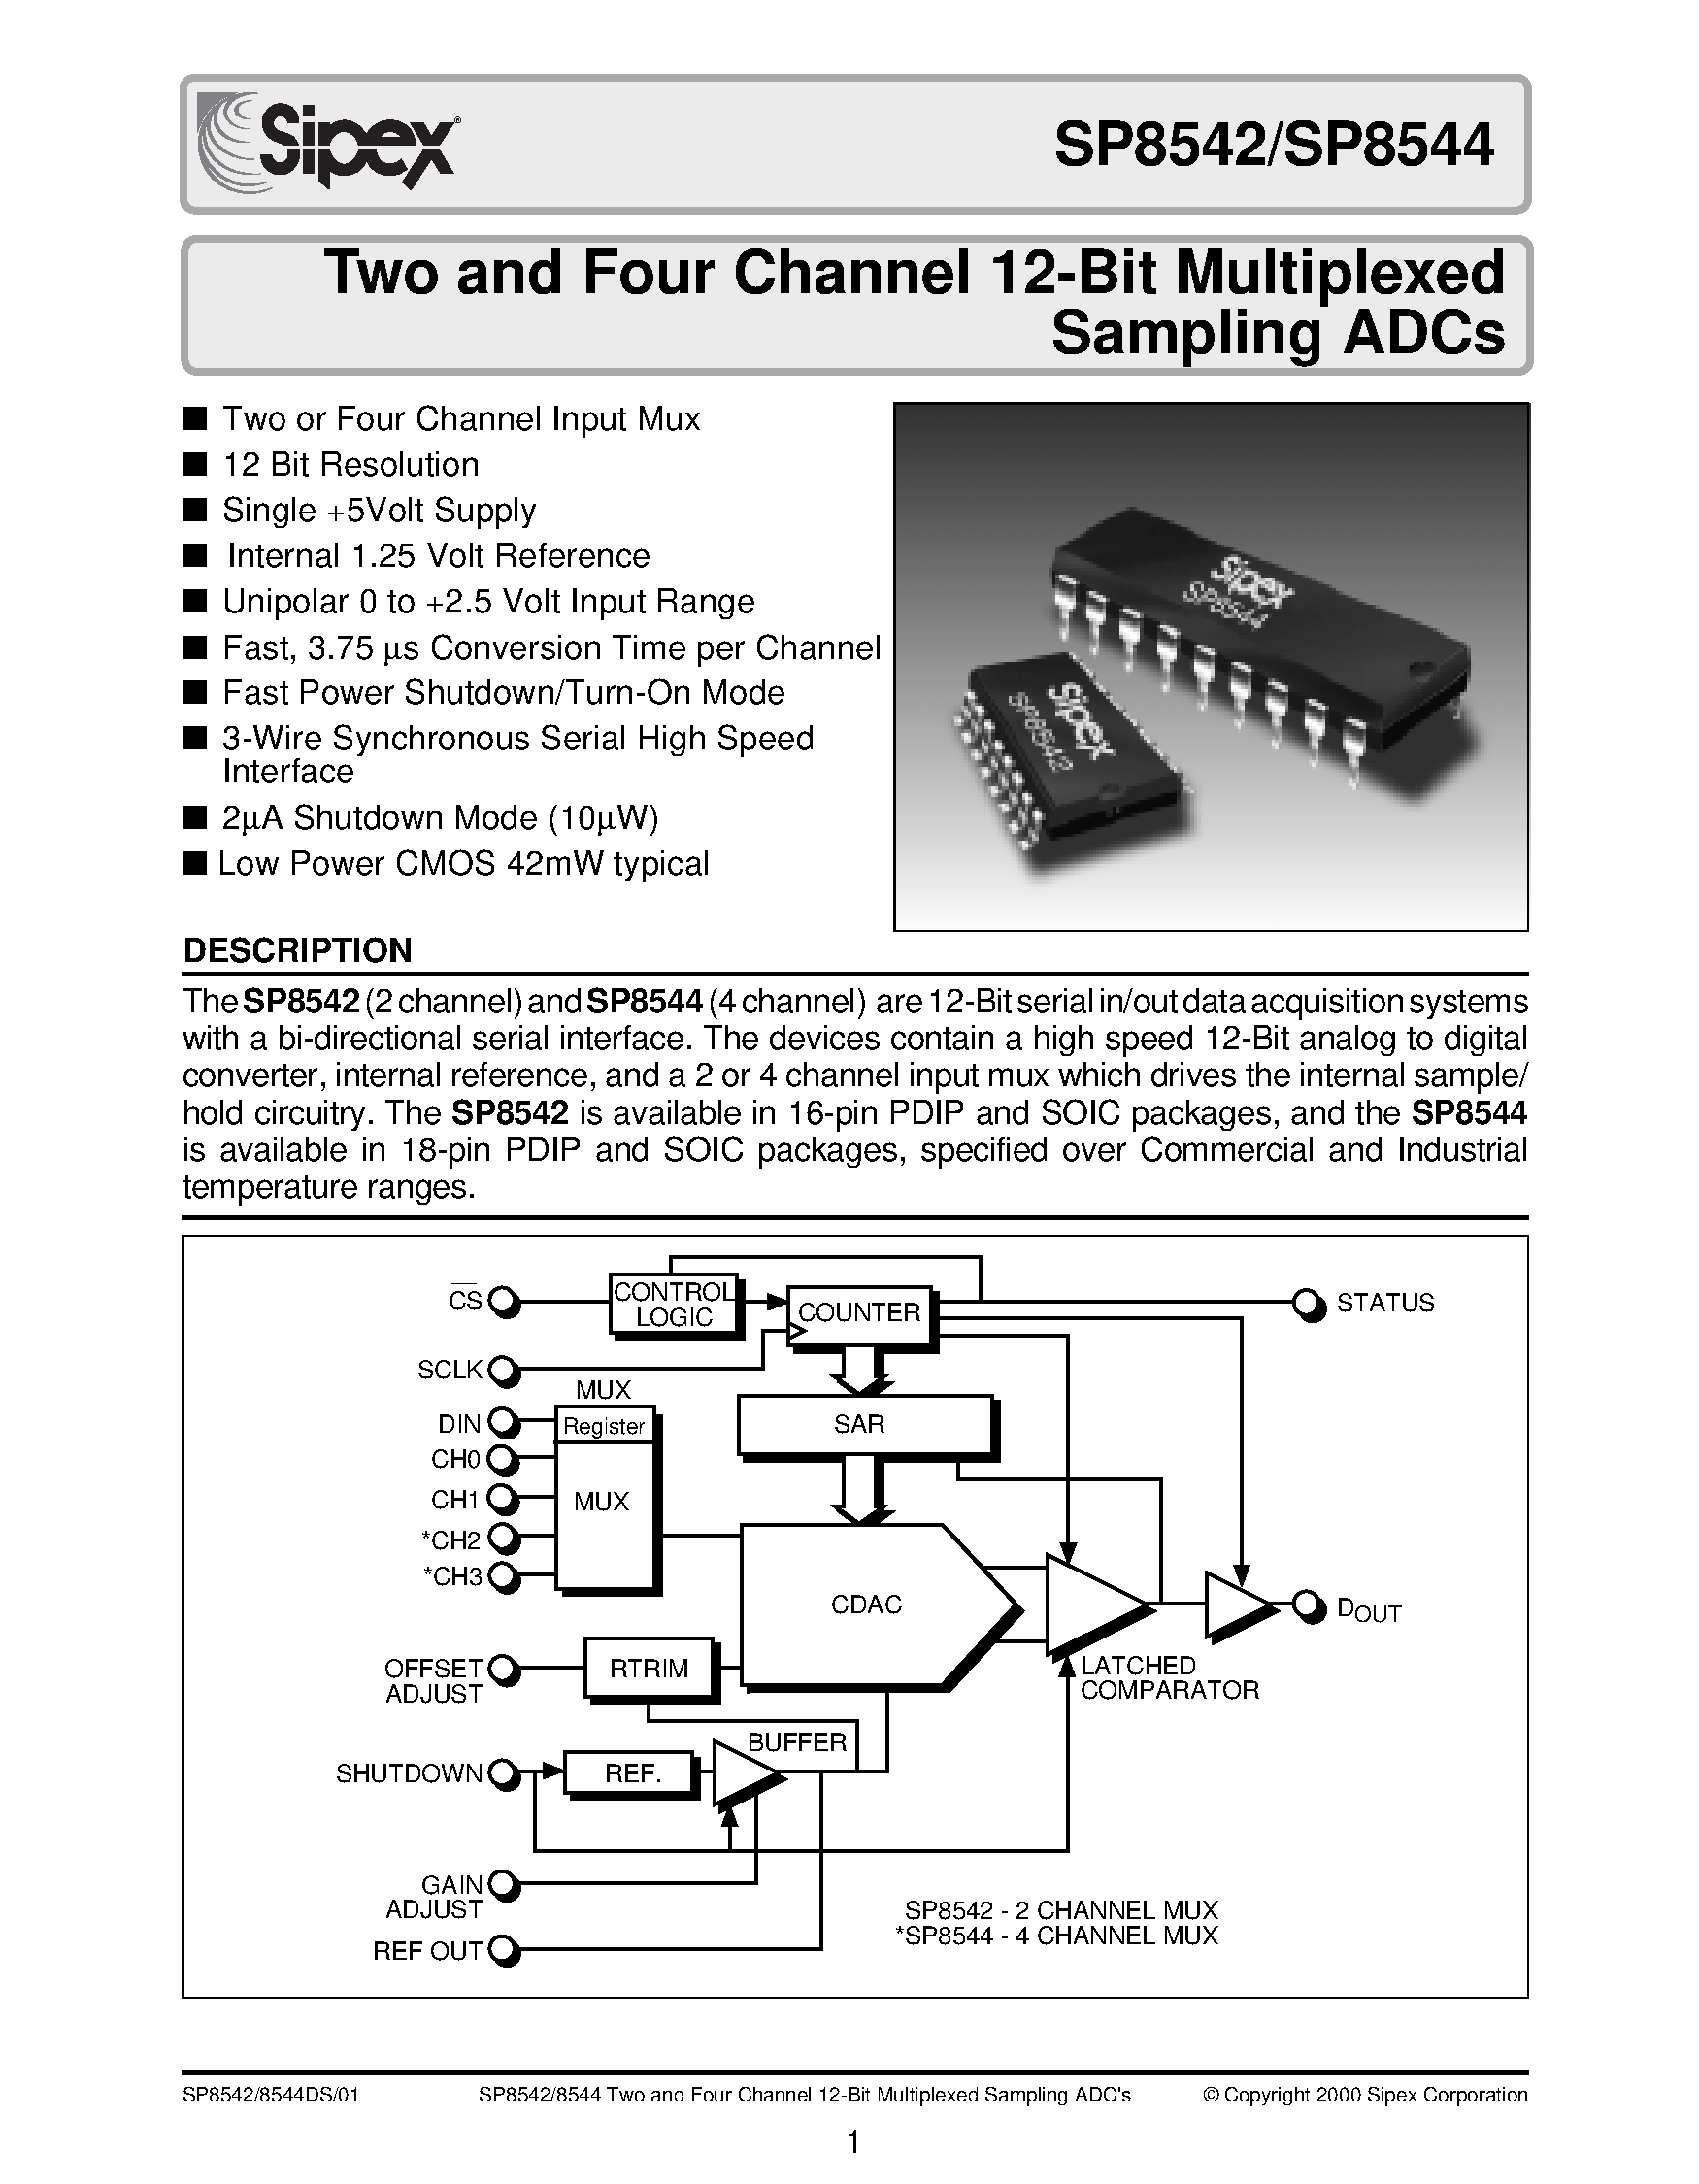 Datasheet SP8542 - Two and Four Channel 12-Bit Multiplexed Sampling ADCs page 1